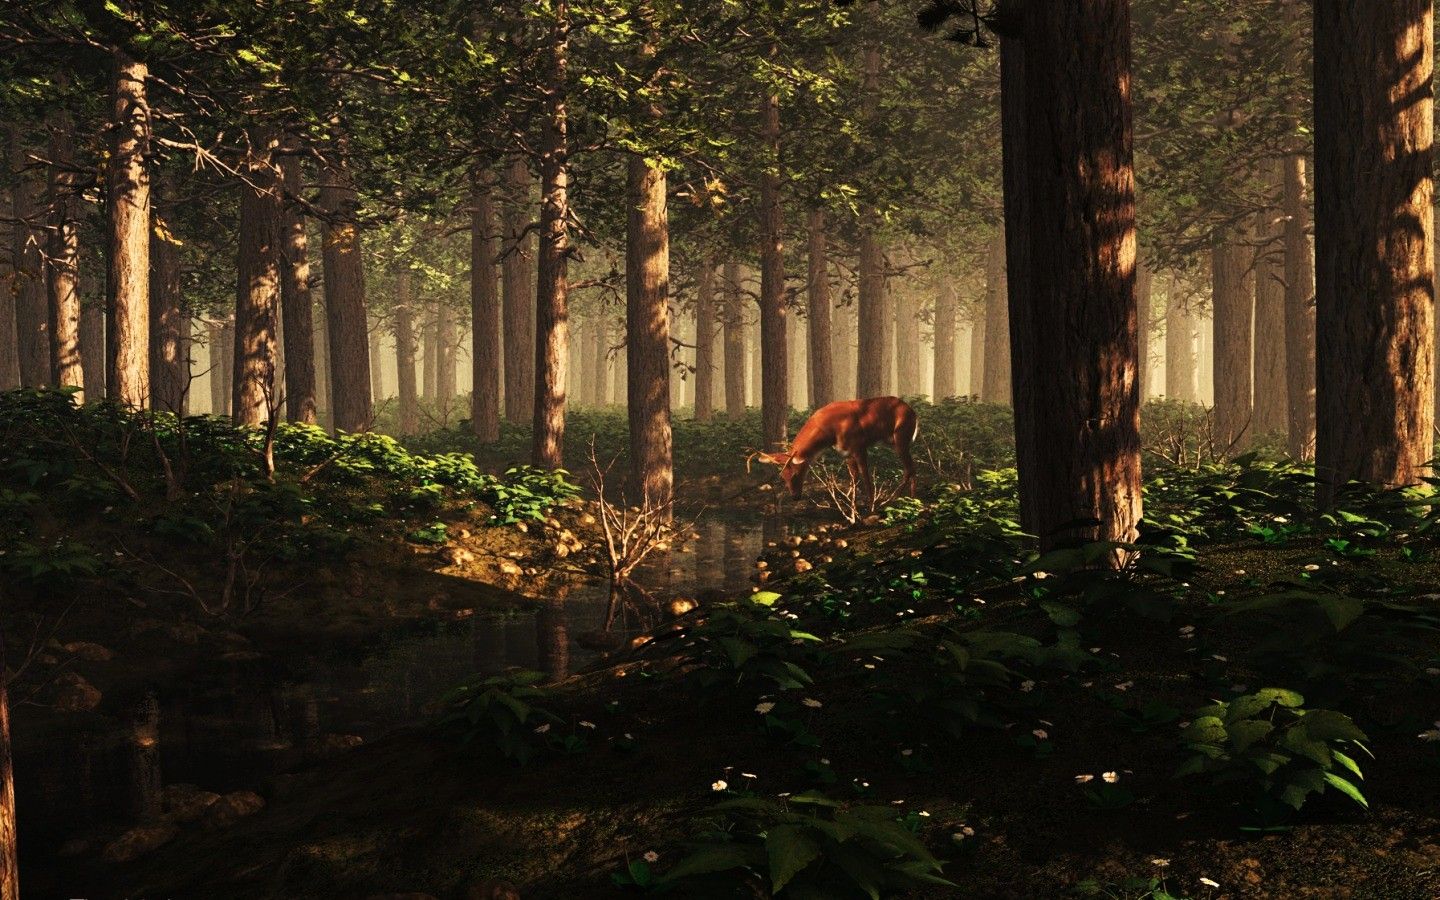 A deer in the forest drinking water from a stream - Forest